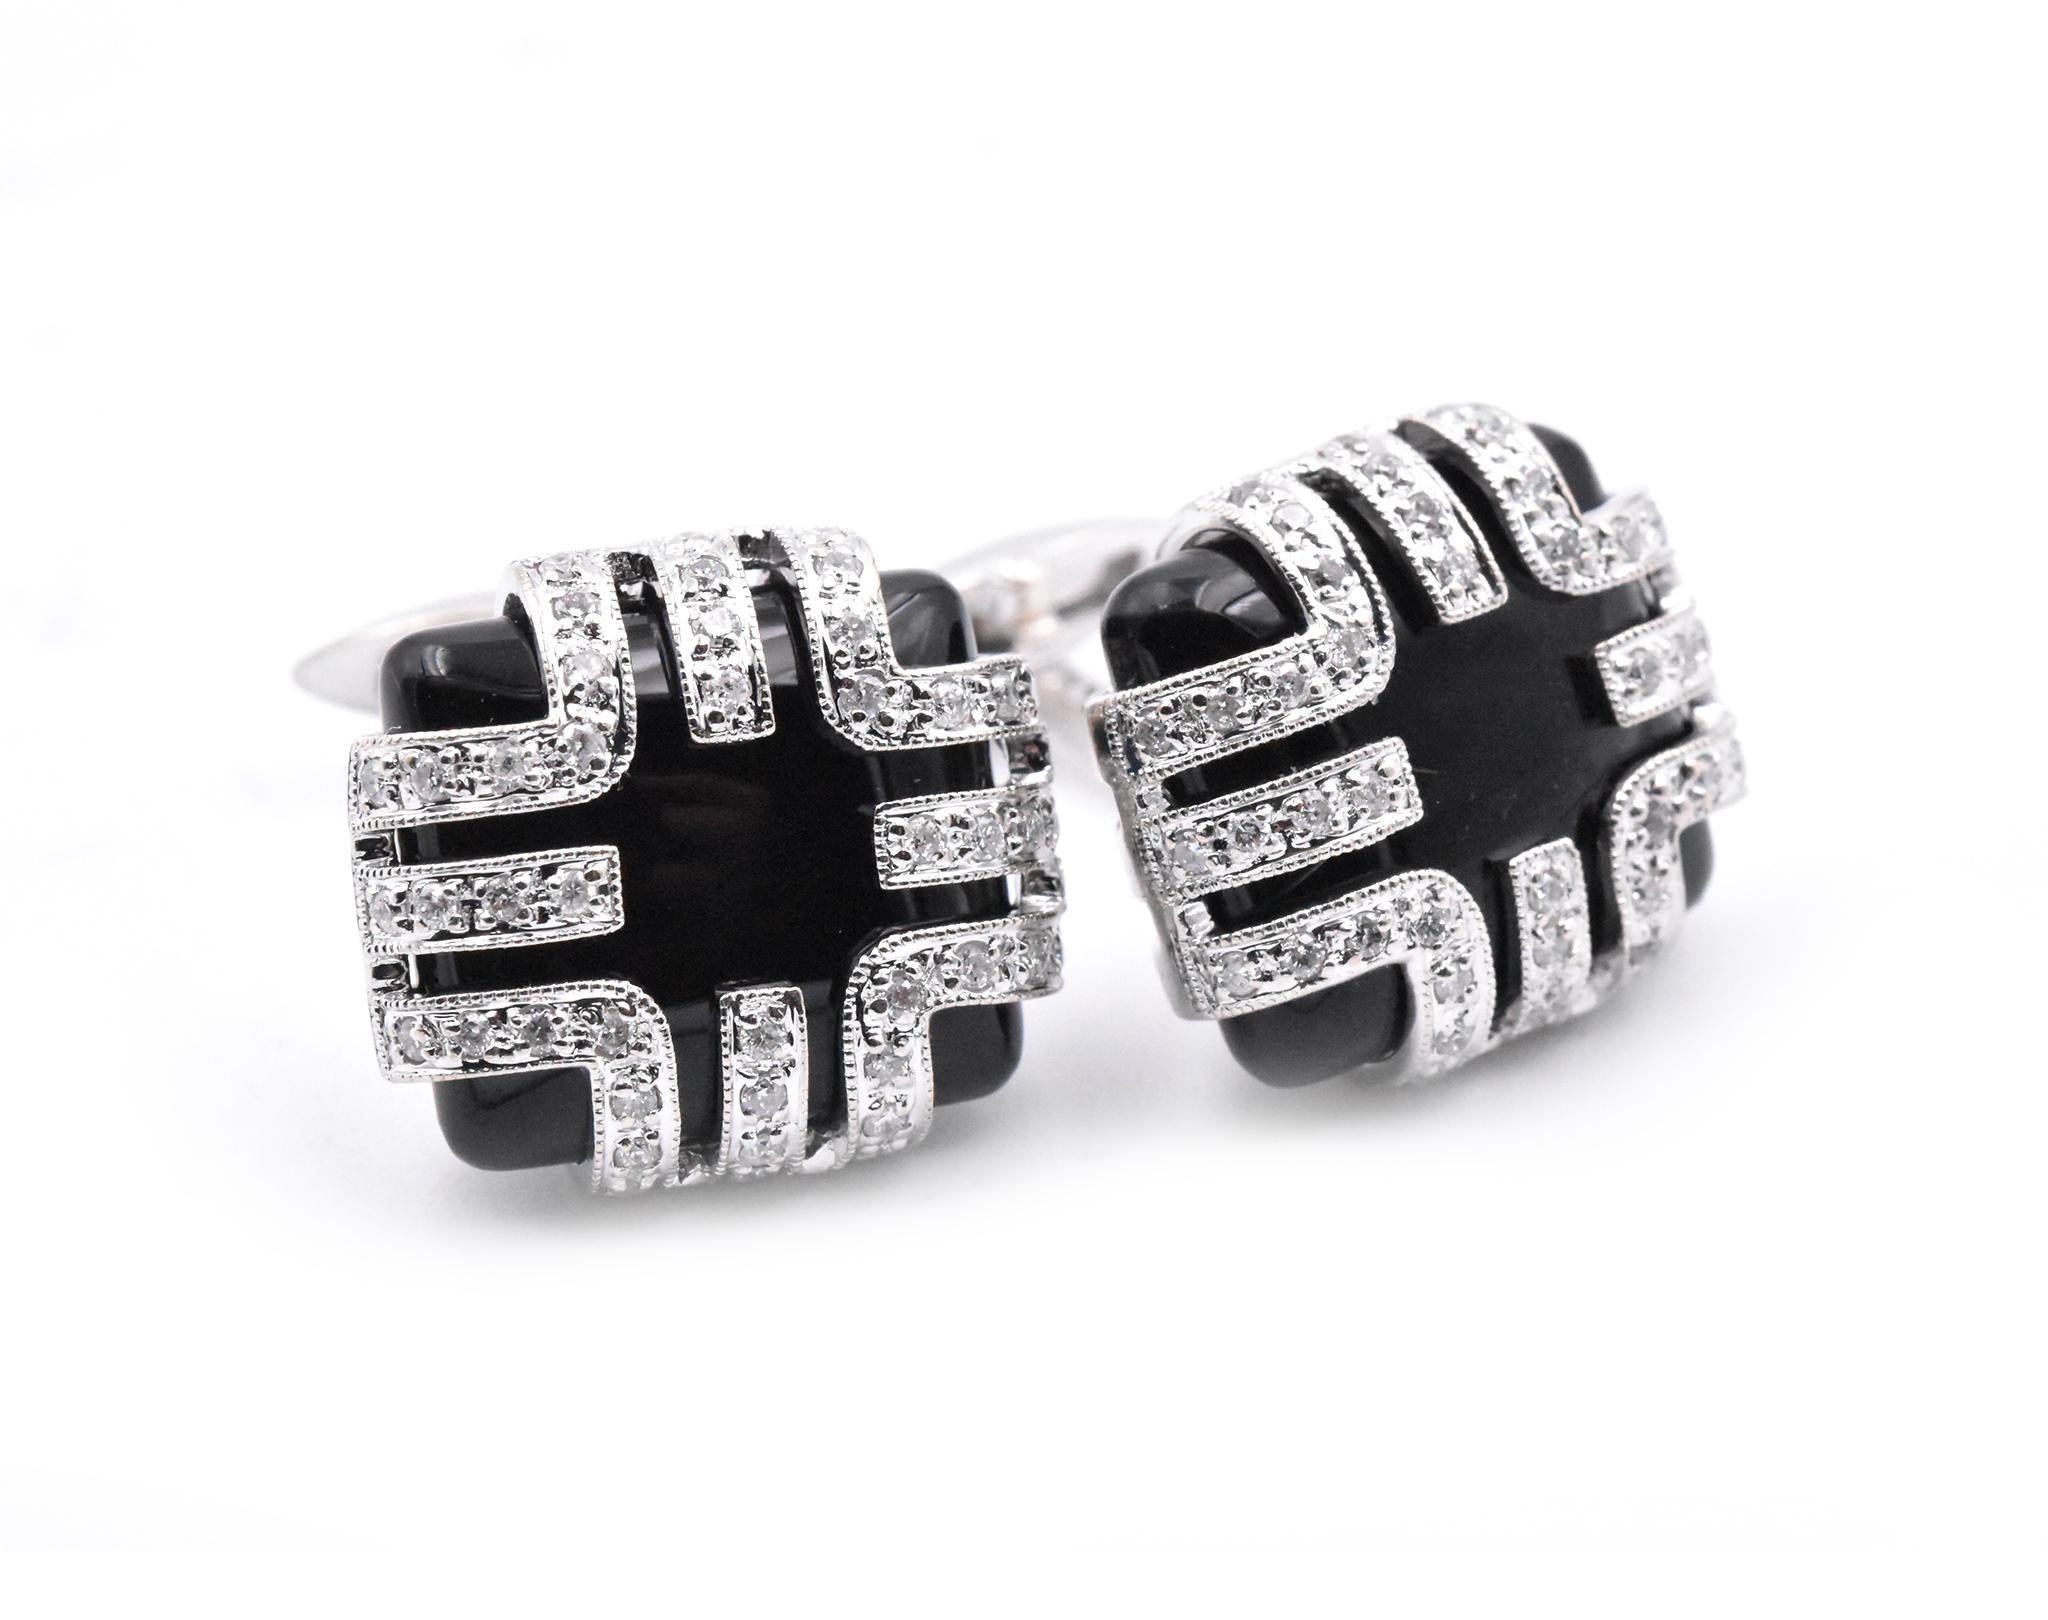 Material: 18k white gold
Diamonds: 88 round brilliant cut = .50cttw
Color: H 
Clarity: SI
Dimensions: cufflinks measure 17mm x 15.60mm
Weight: 15.19 grams
